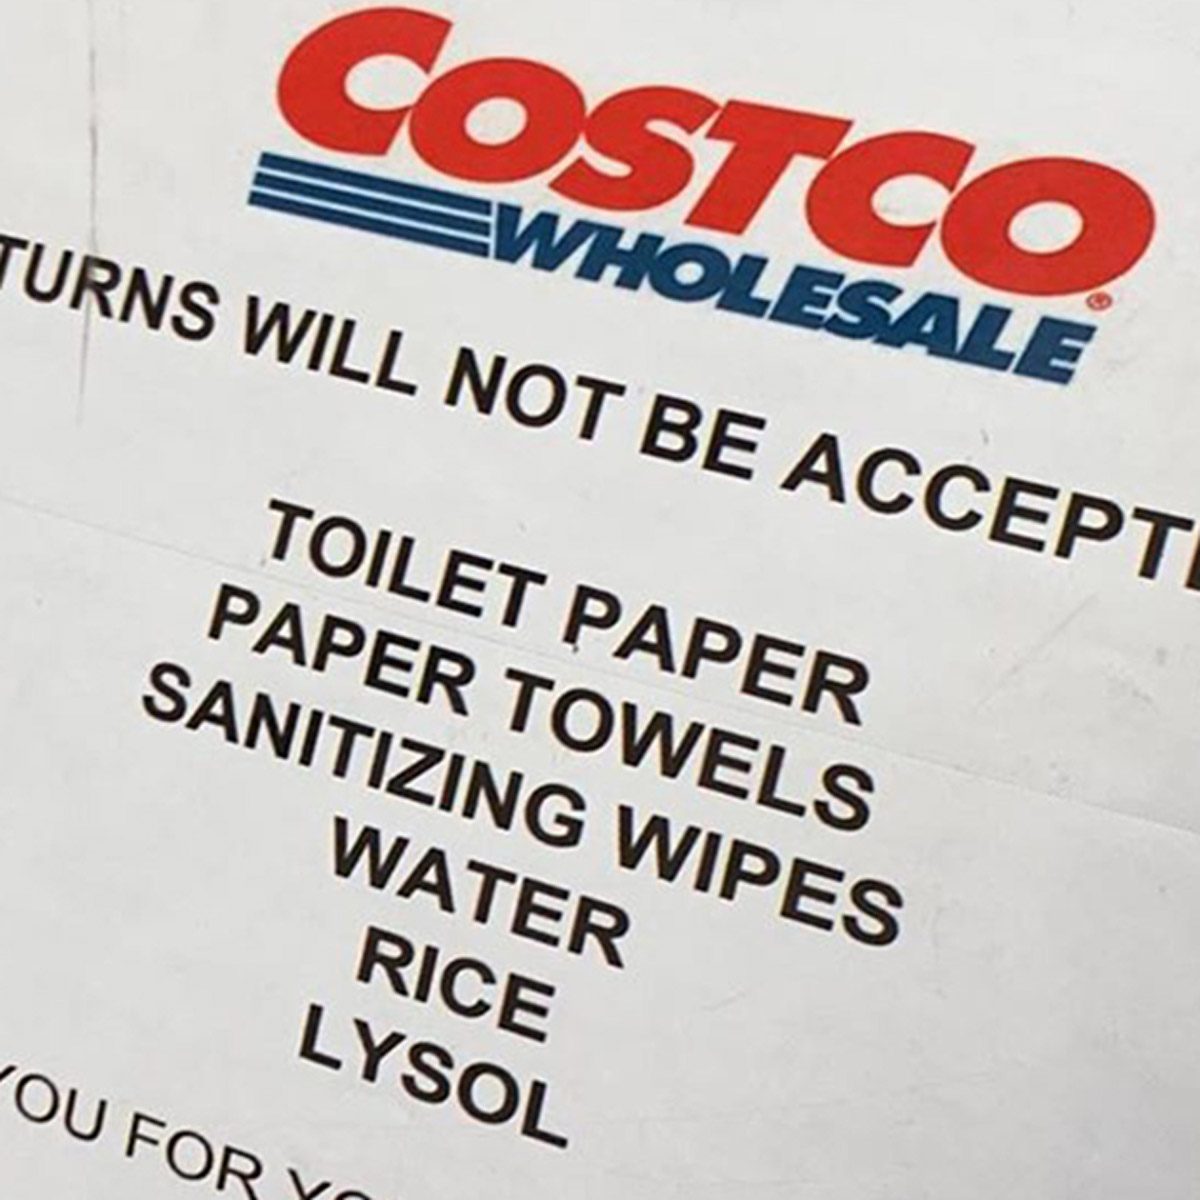 Costco Won’t Let Shoppers Return Toilet Paper and Other High-Demand Items